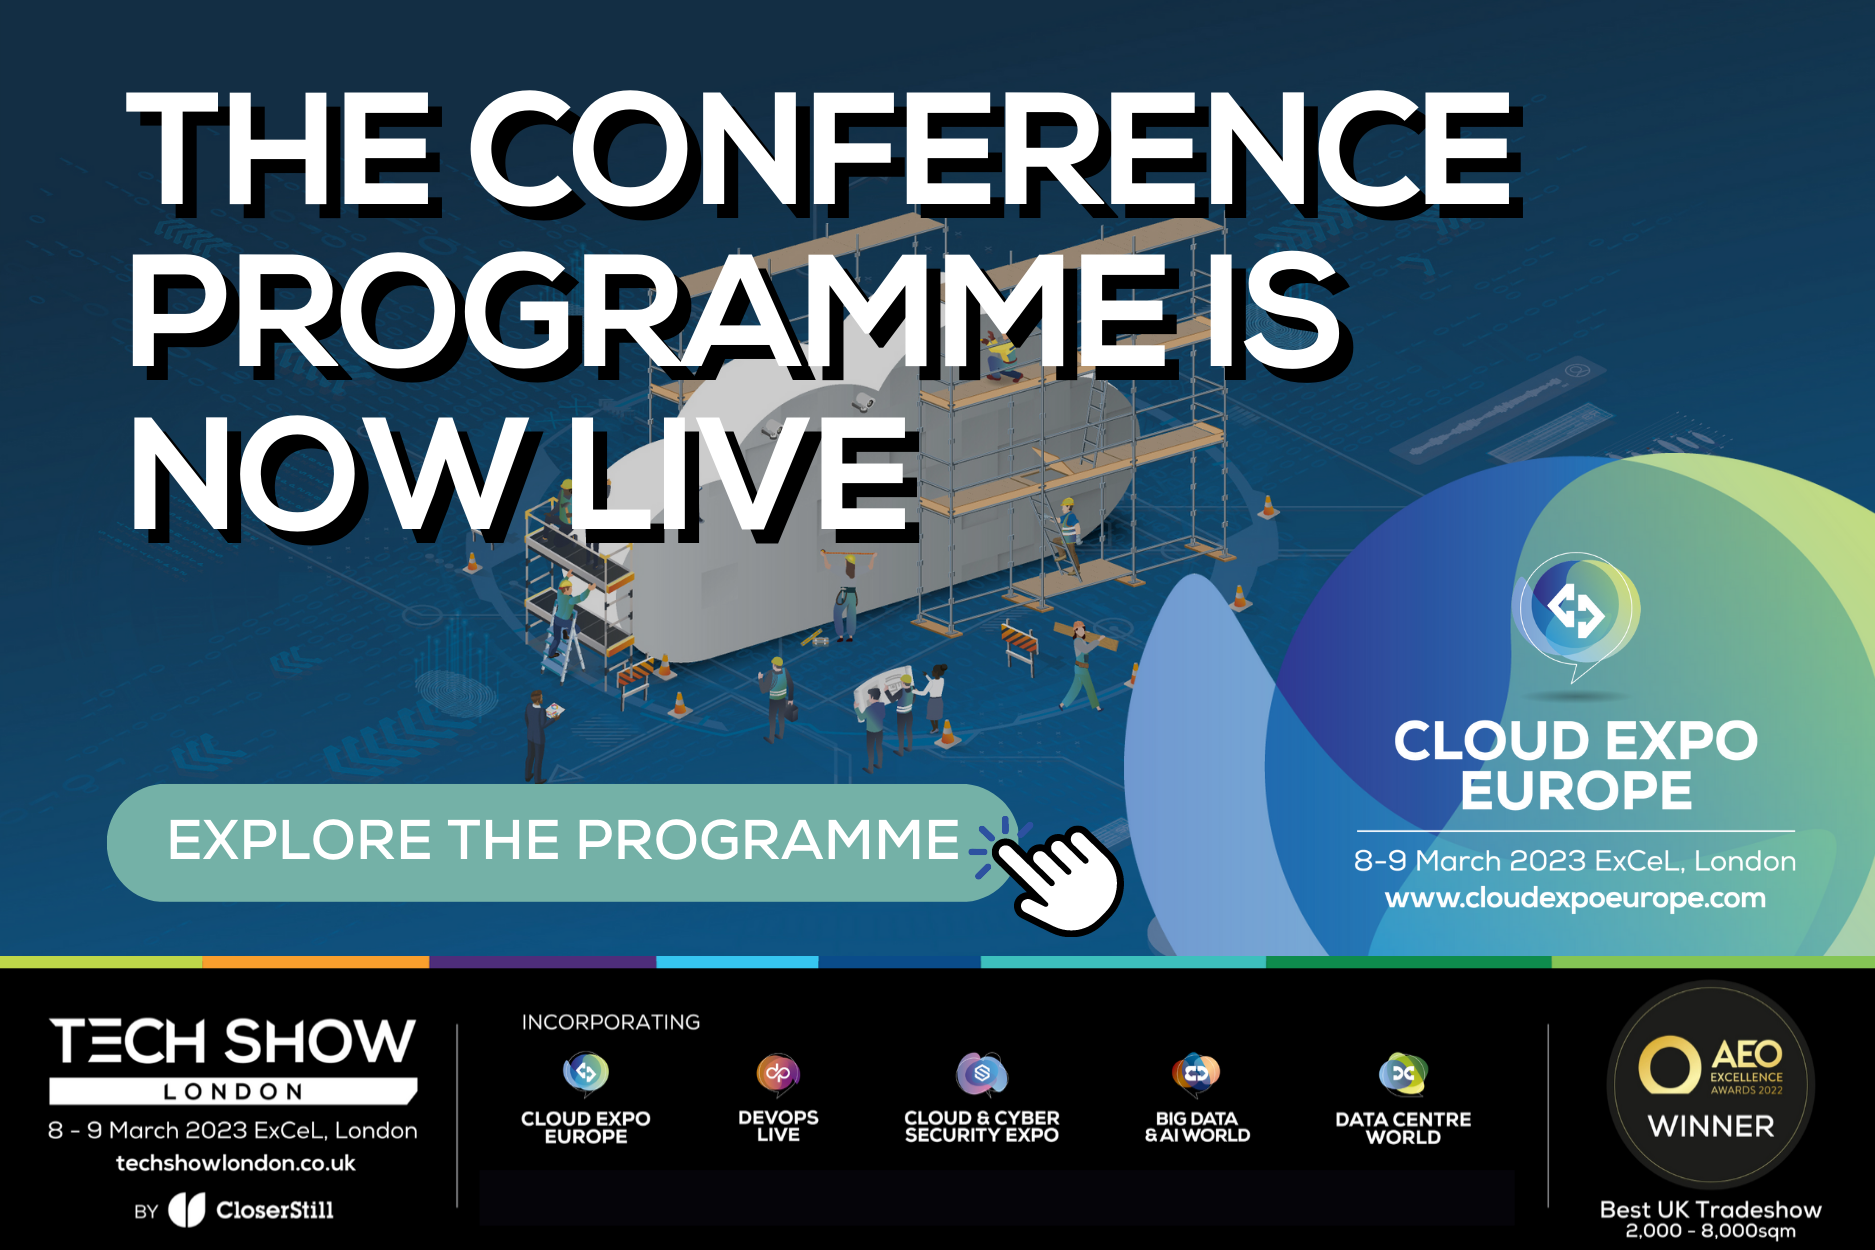 THE CONFERENCE PROGRAMME IS NOW LIVE